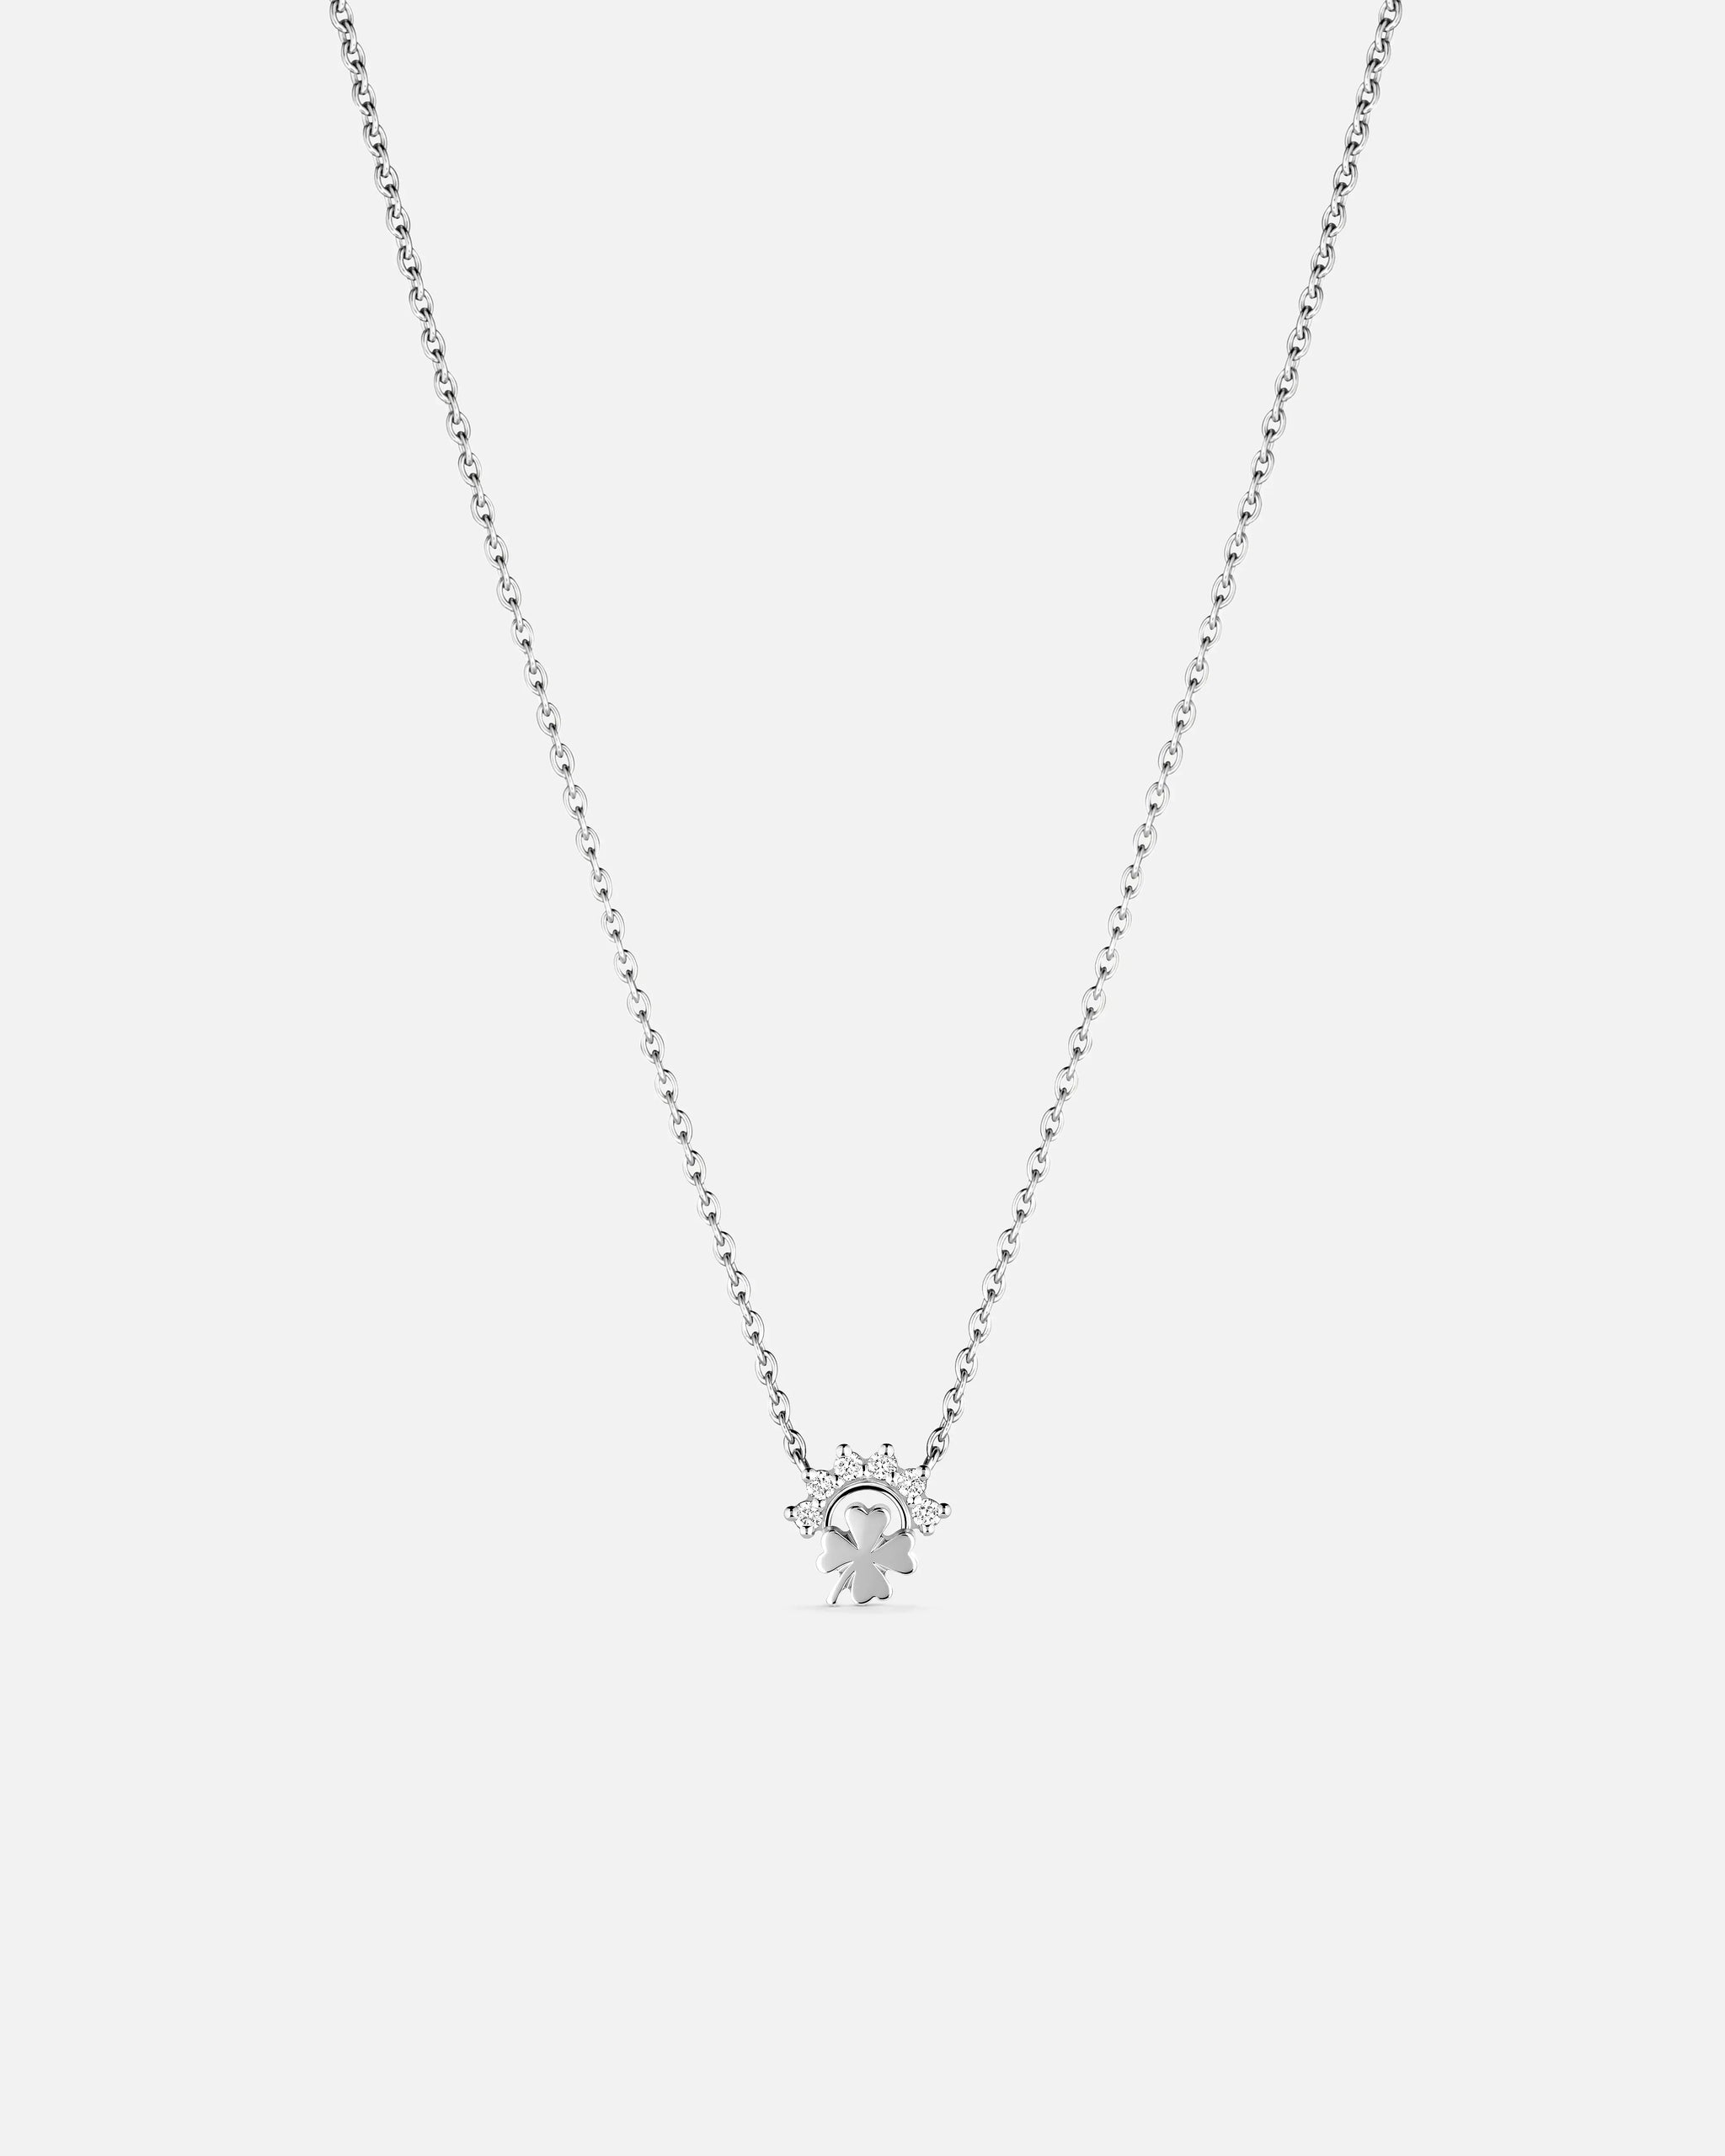 Small Luck Pendant in White Gold - 1 - Nouvel Heritage